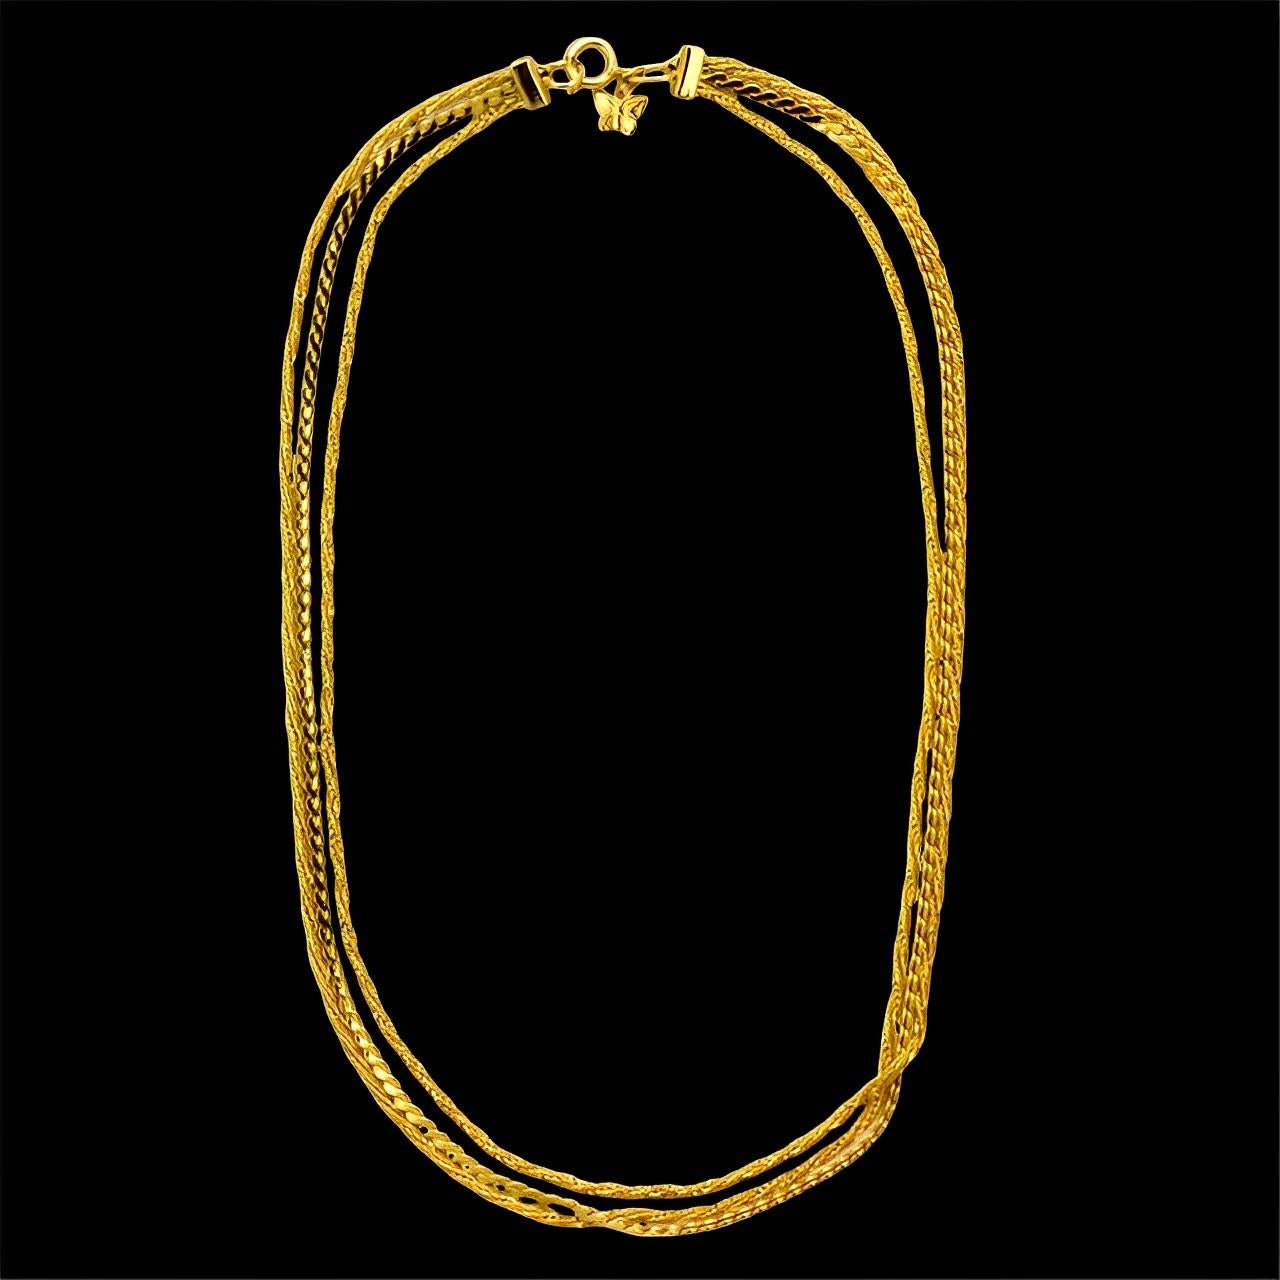 Michelle René Gold Plated Three Strand Rope and Serpentine Necklace circa 1980s For Sale 3